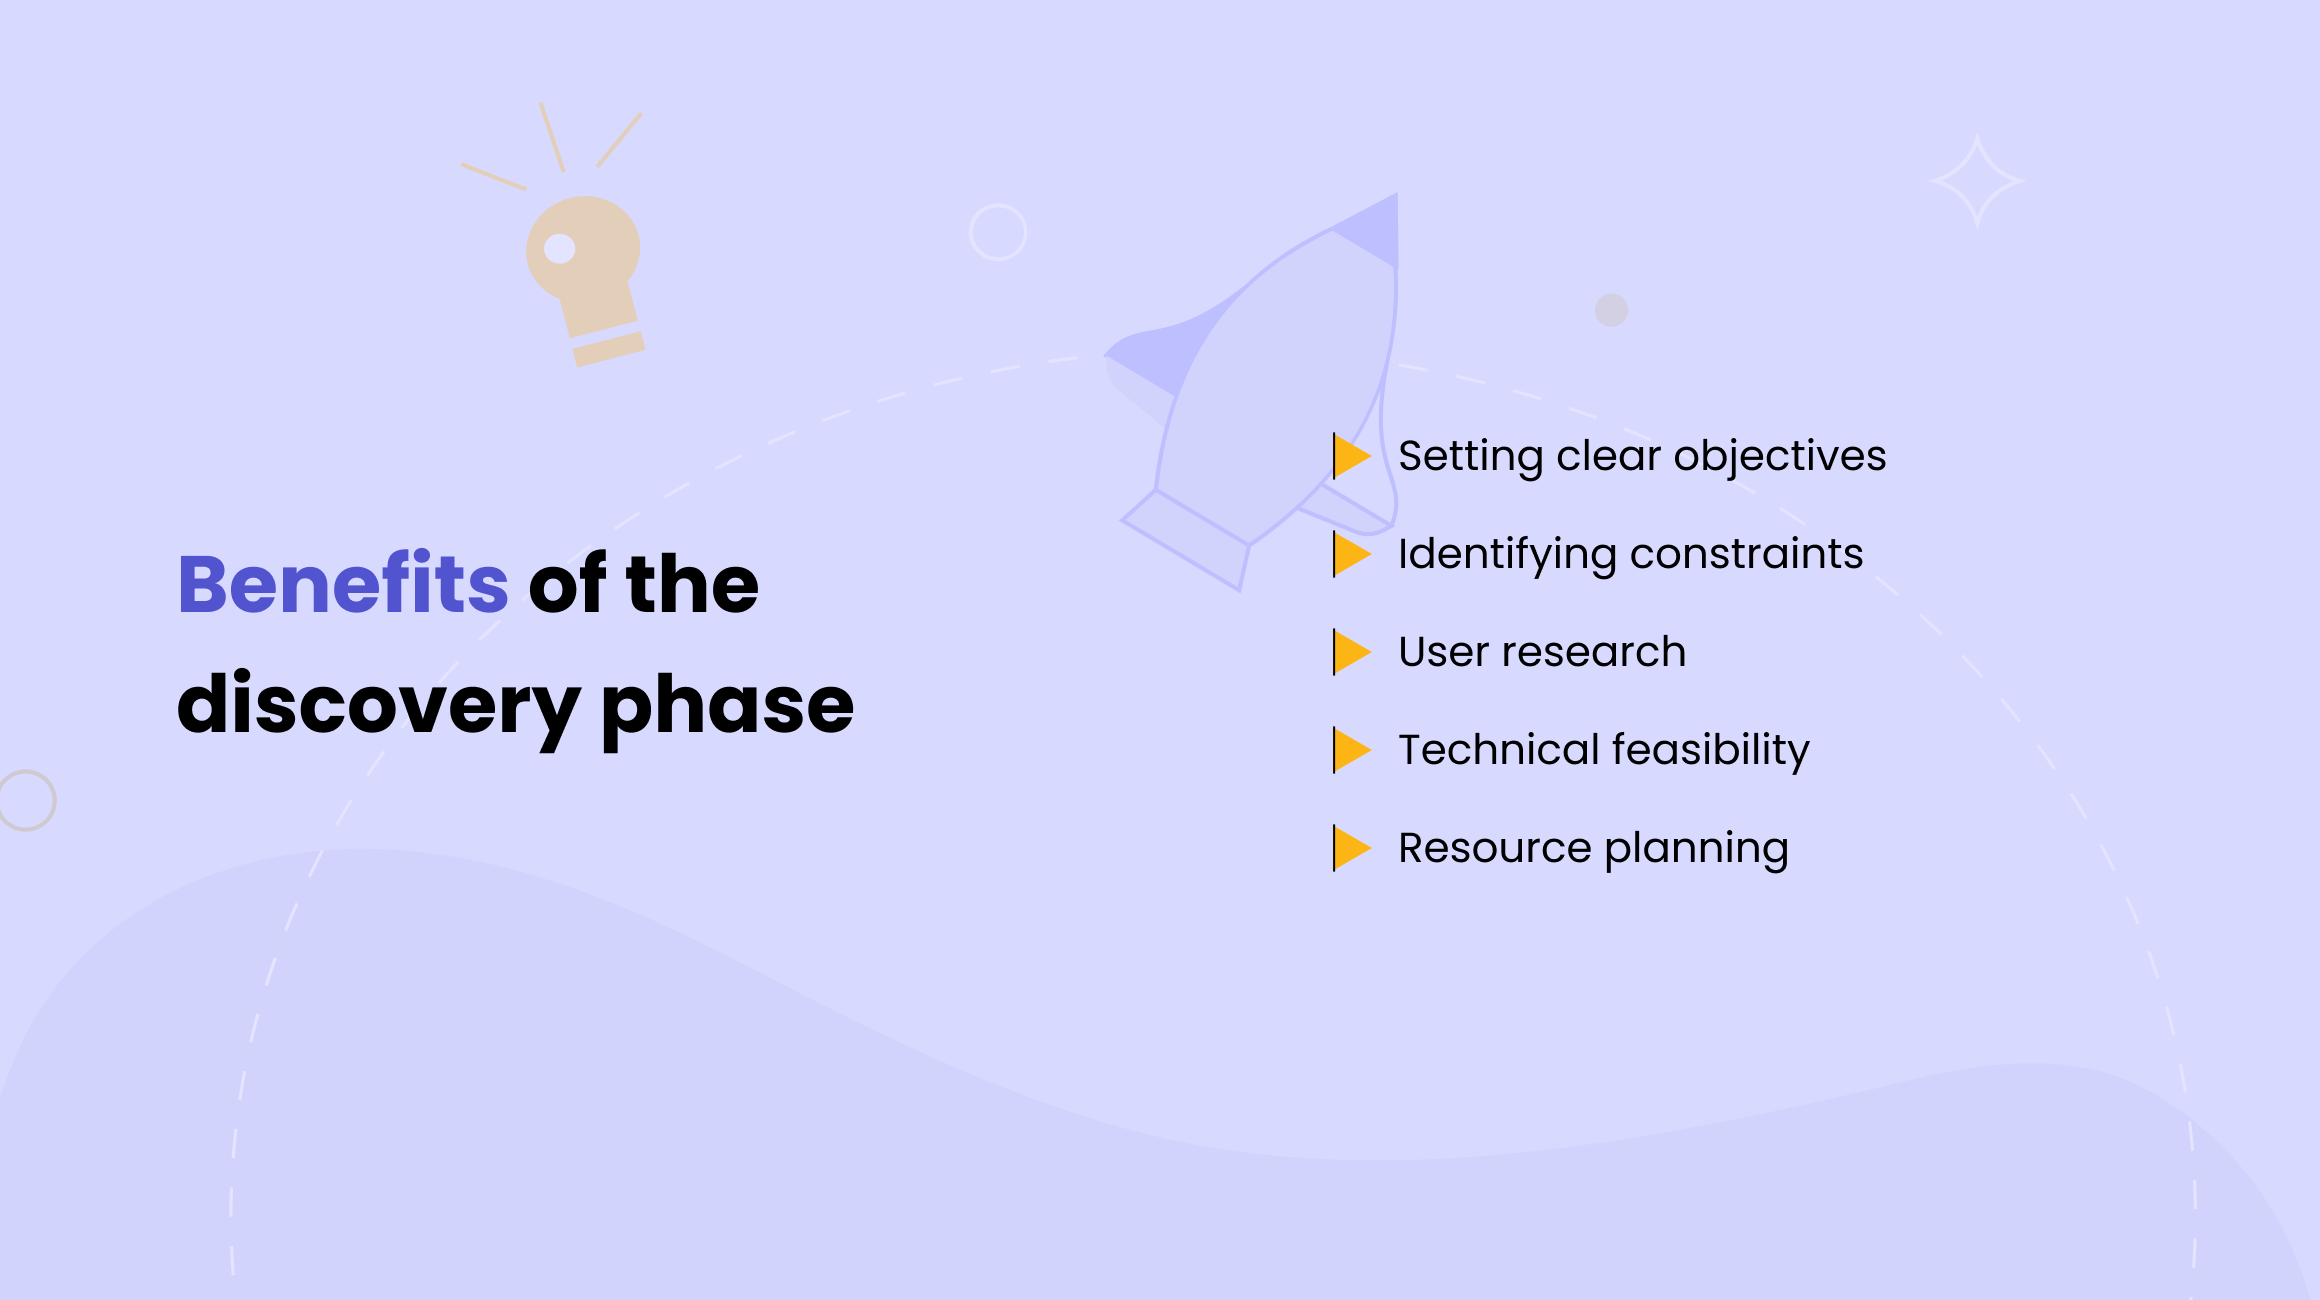 Benefits of the discovery phase